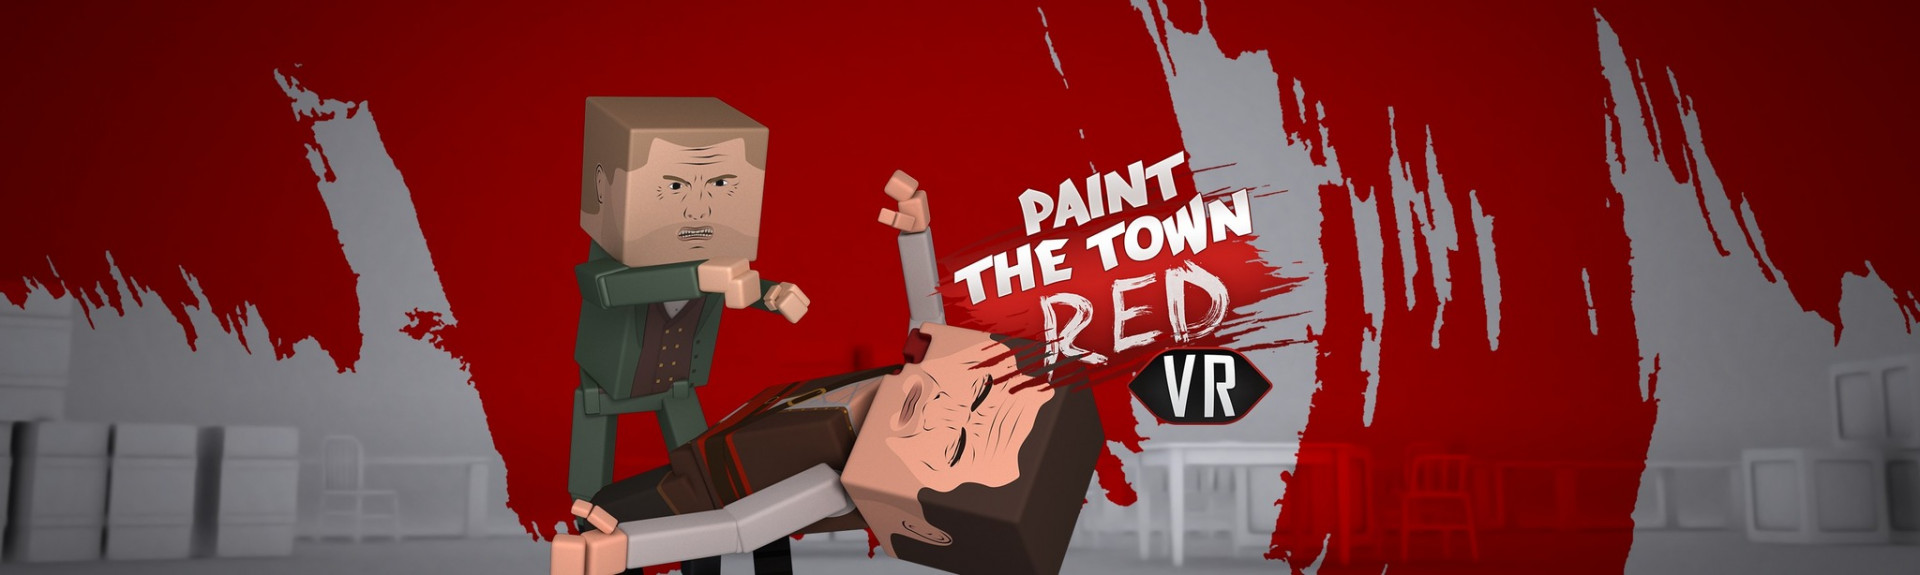 Paint the Town Red VR: ANÁLISIS